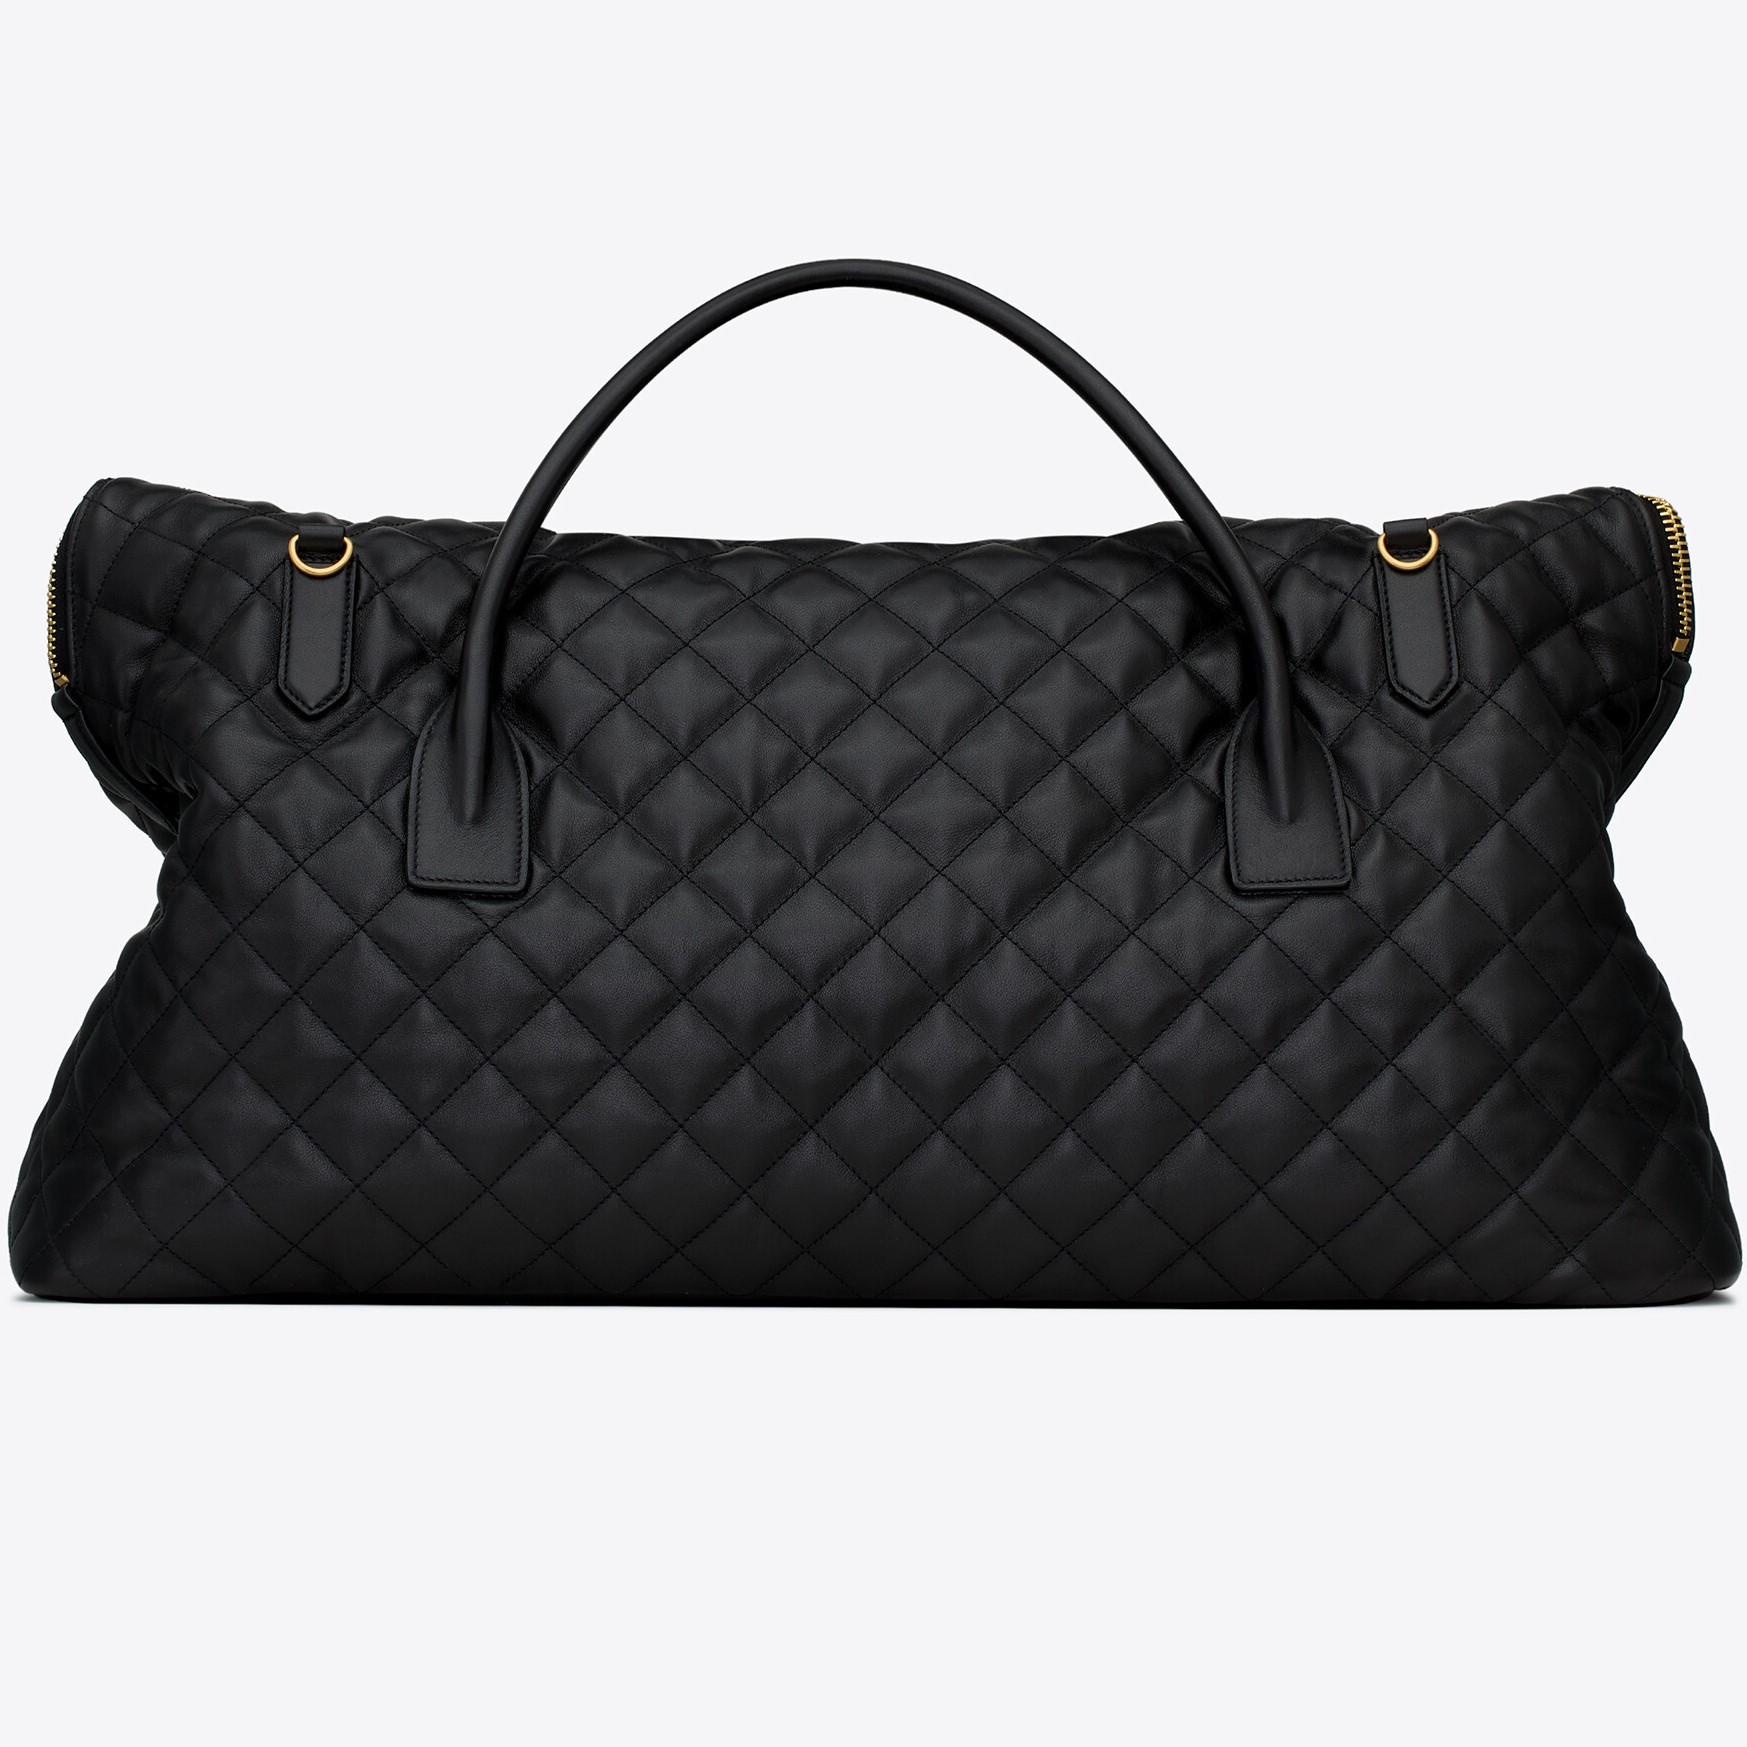 TÚI XÁCH DU LỊCH YSL ES GIANT TRAVEL BAG IN QUILTED LEATHER 5